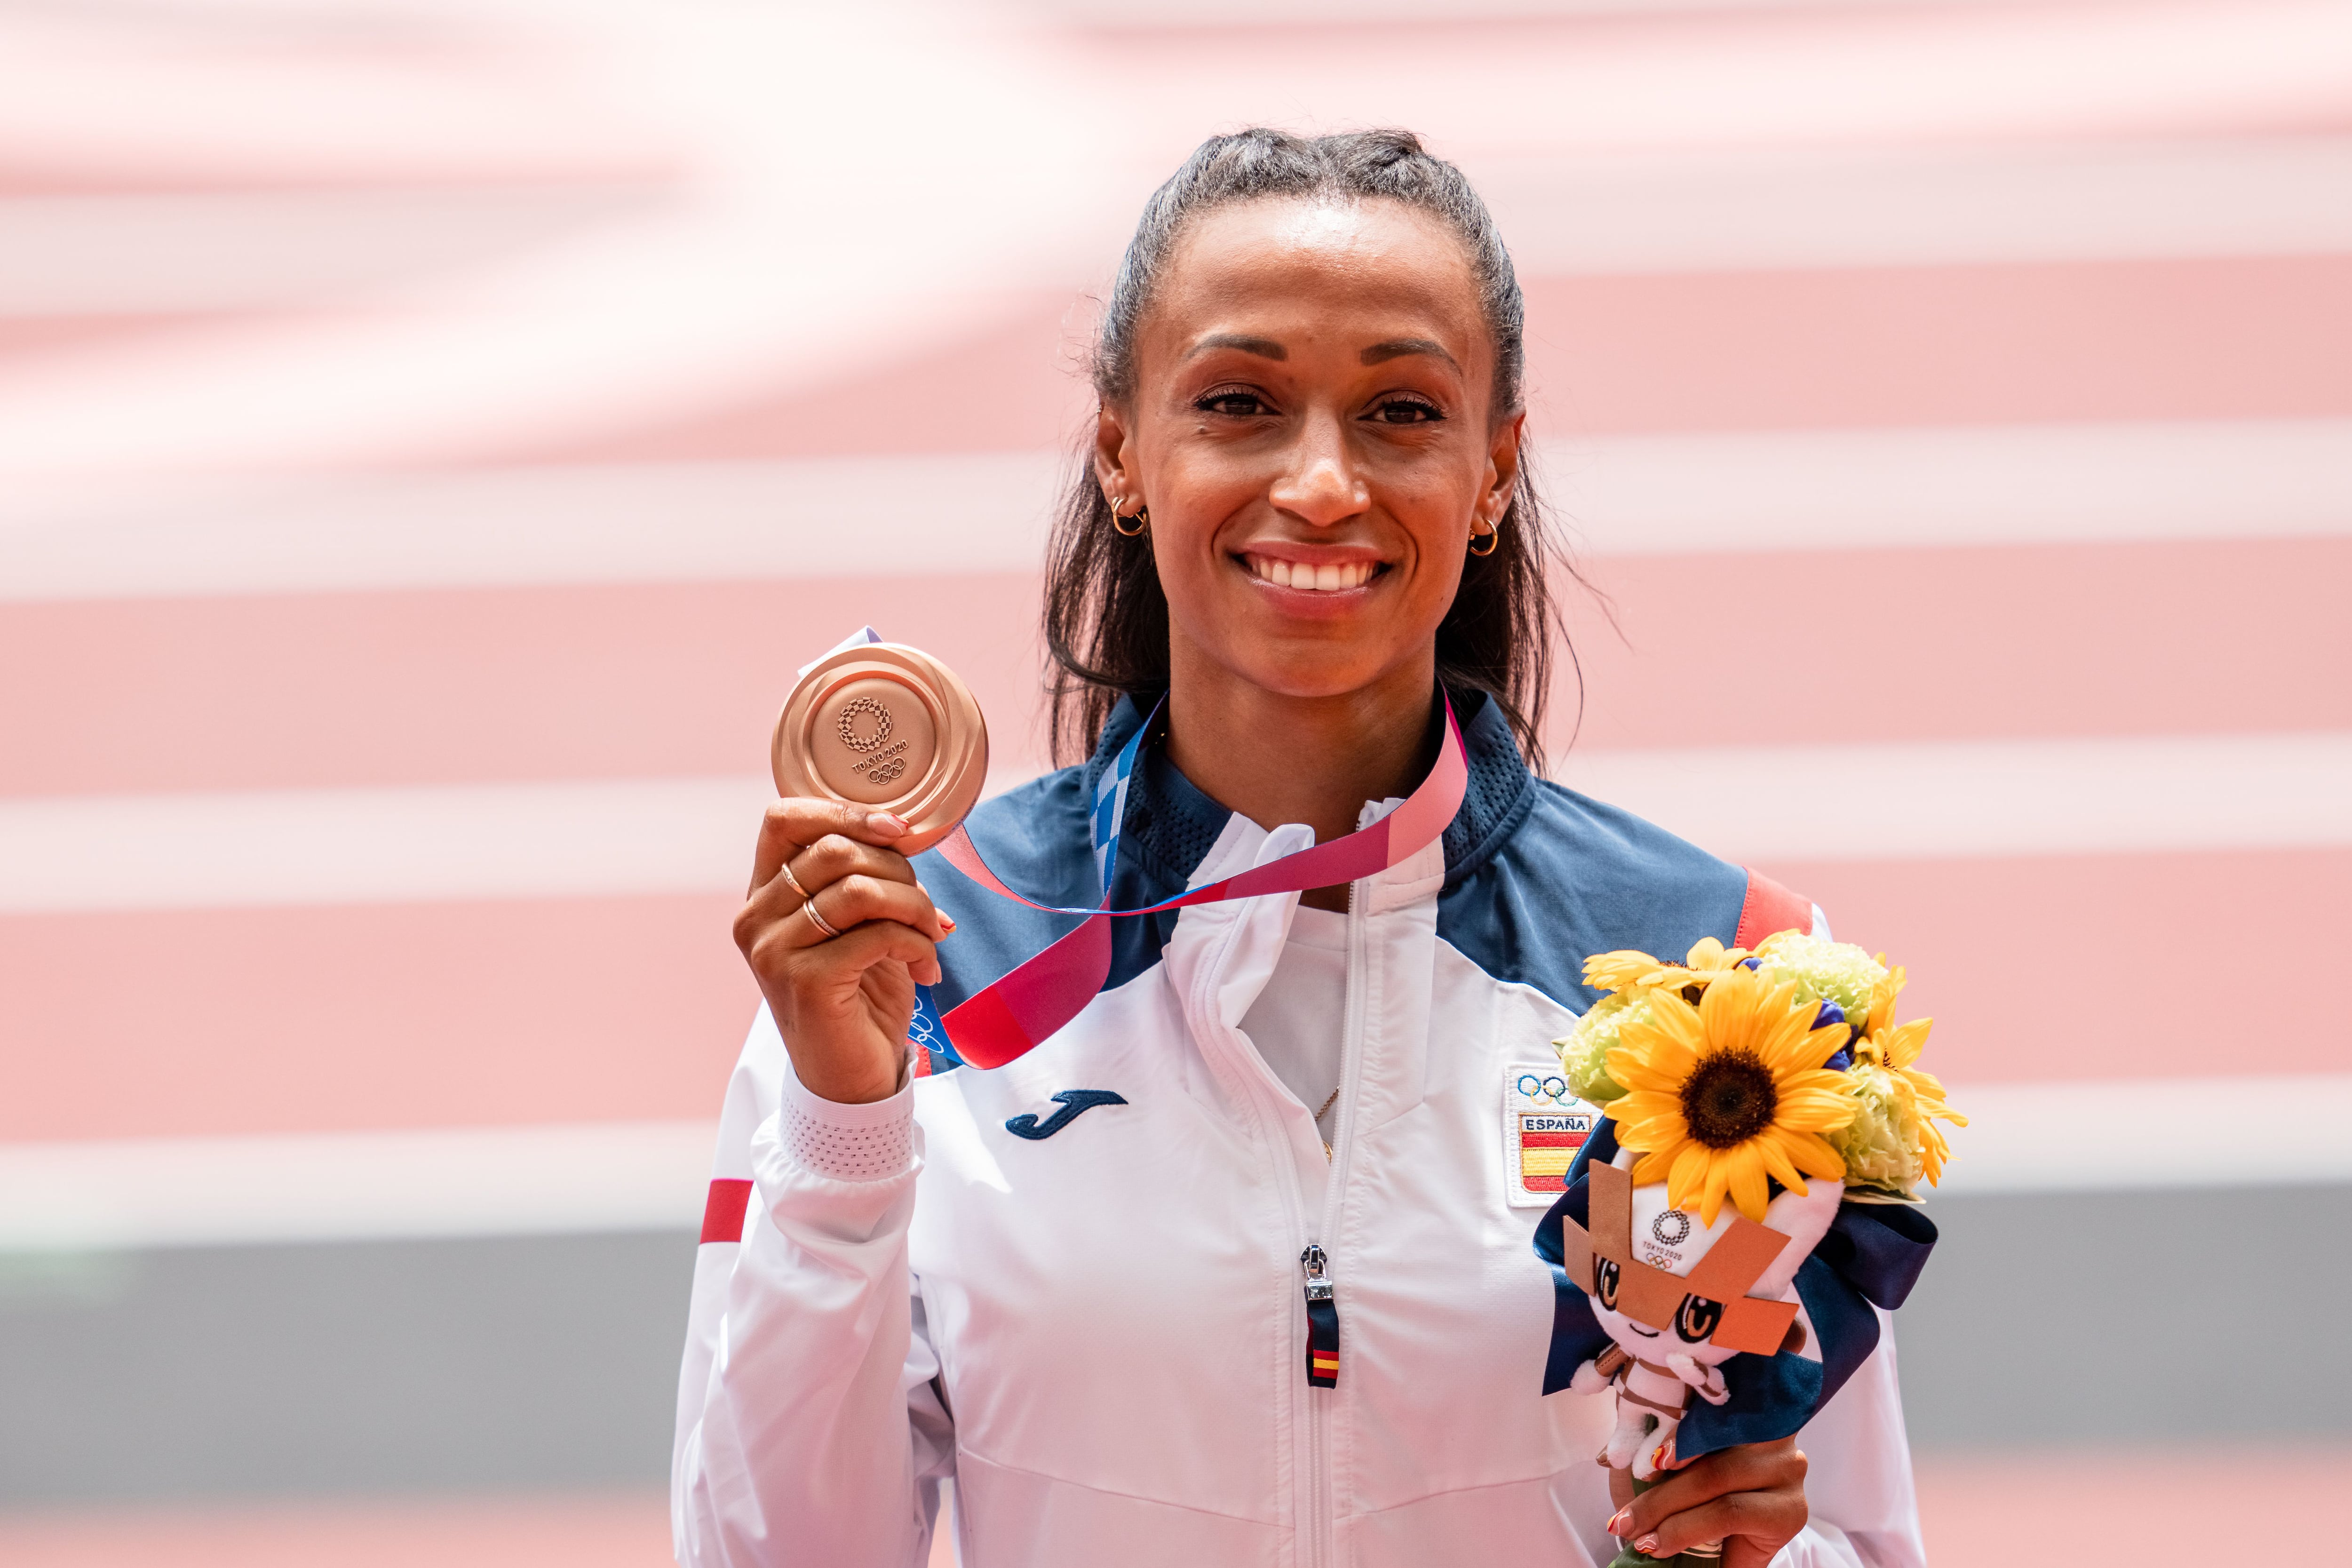 Ana Peleteiro poses with her triple jump bronze medal from the 2020 Tokyo Olympics.